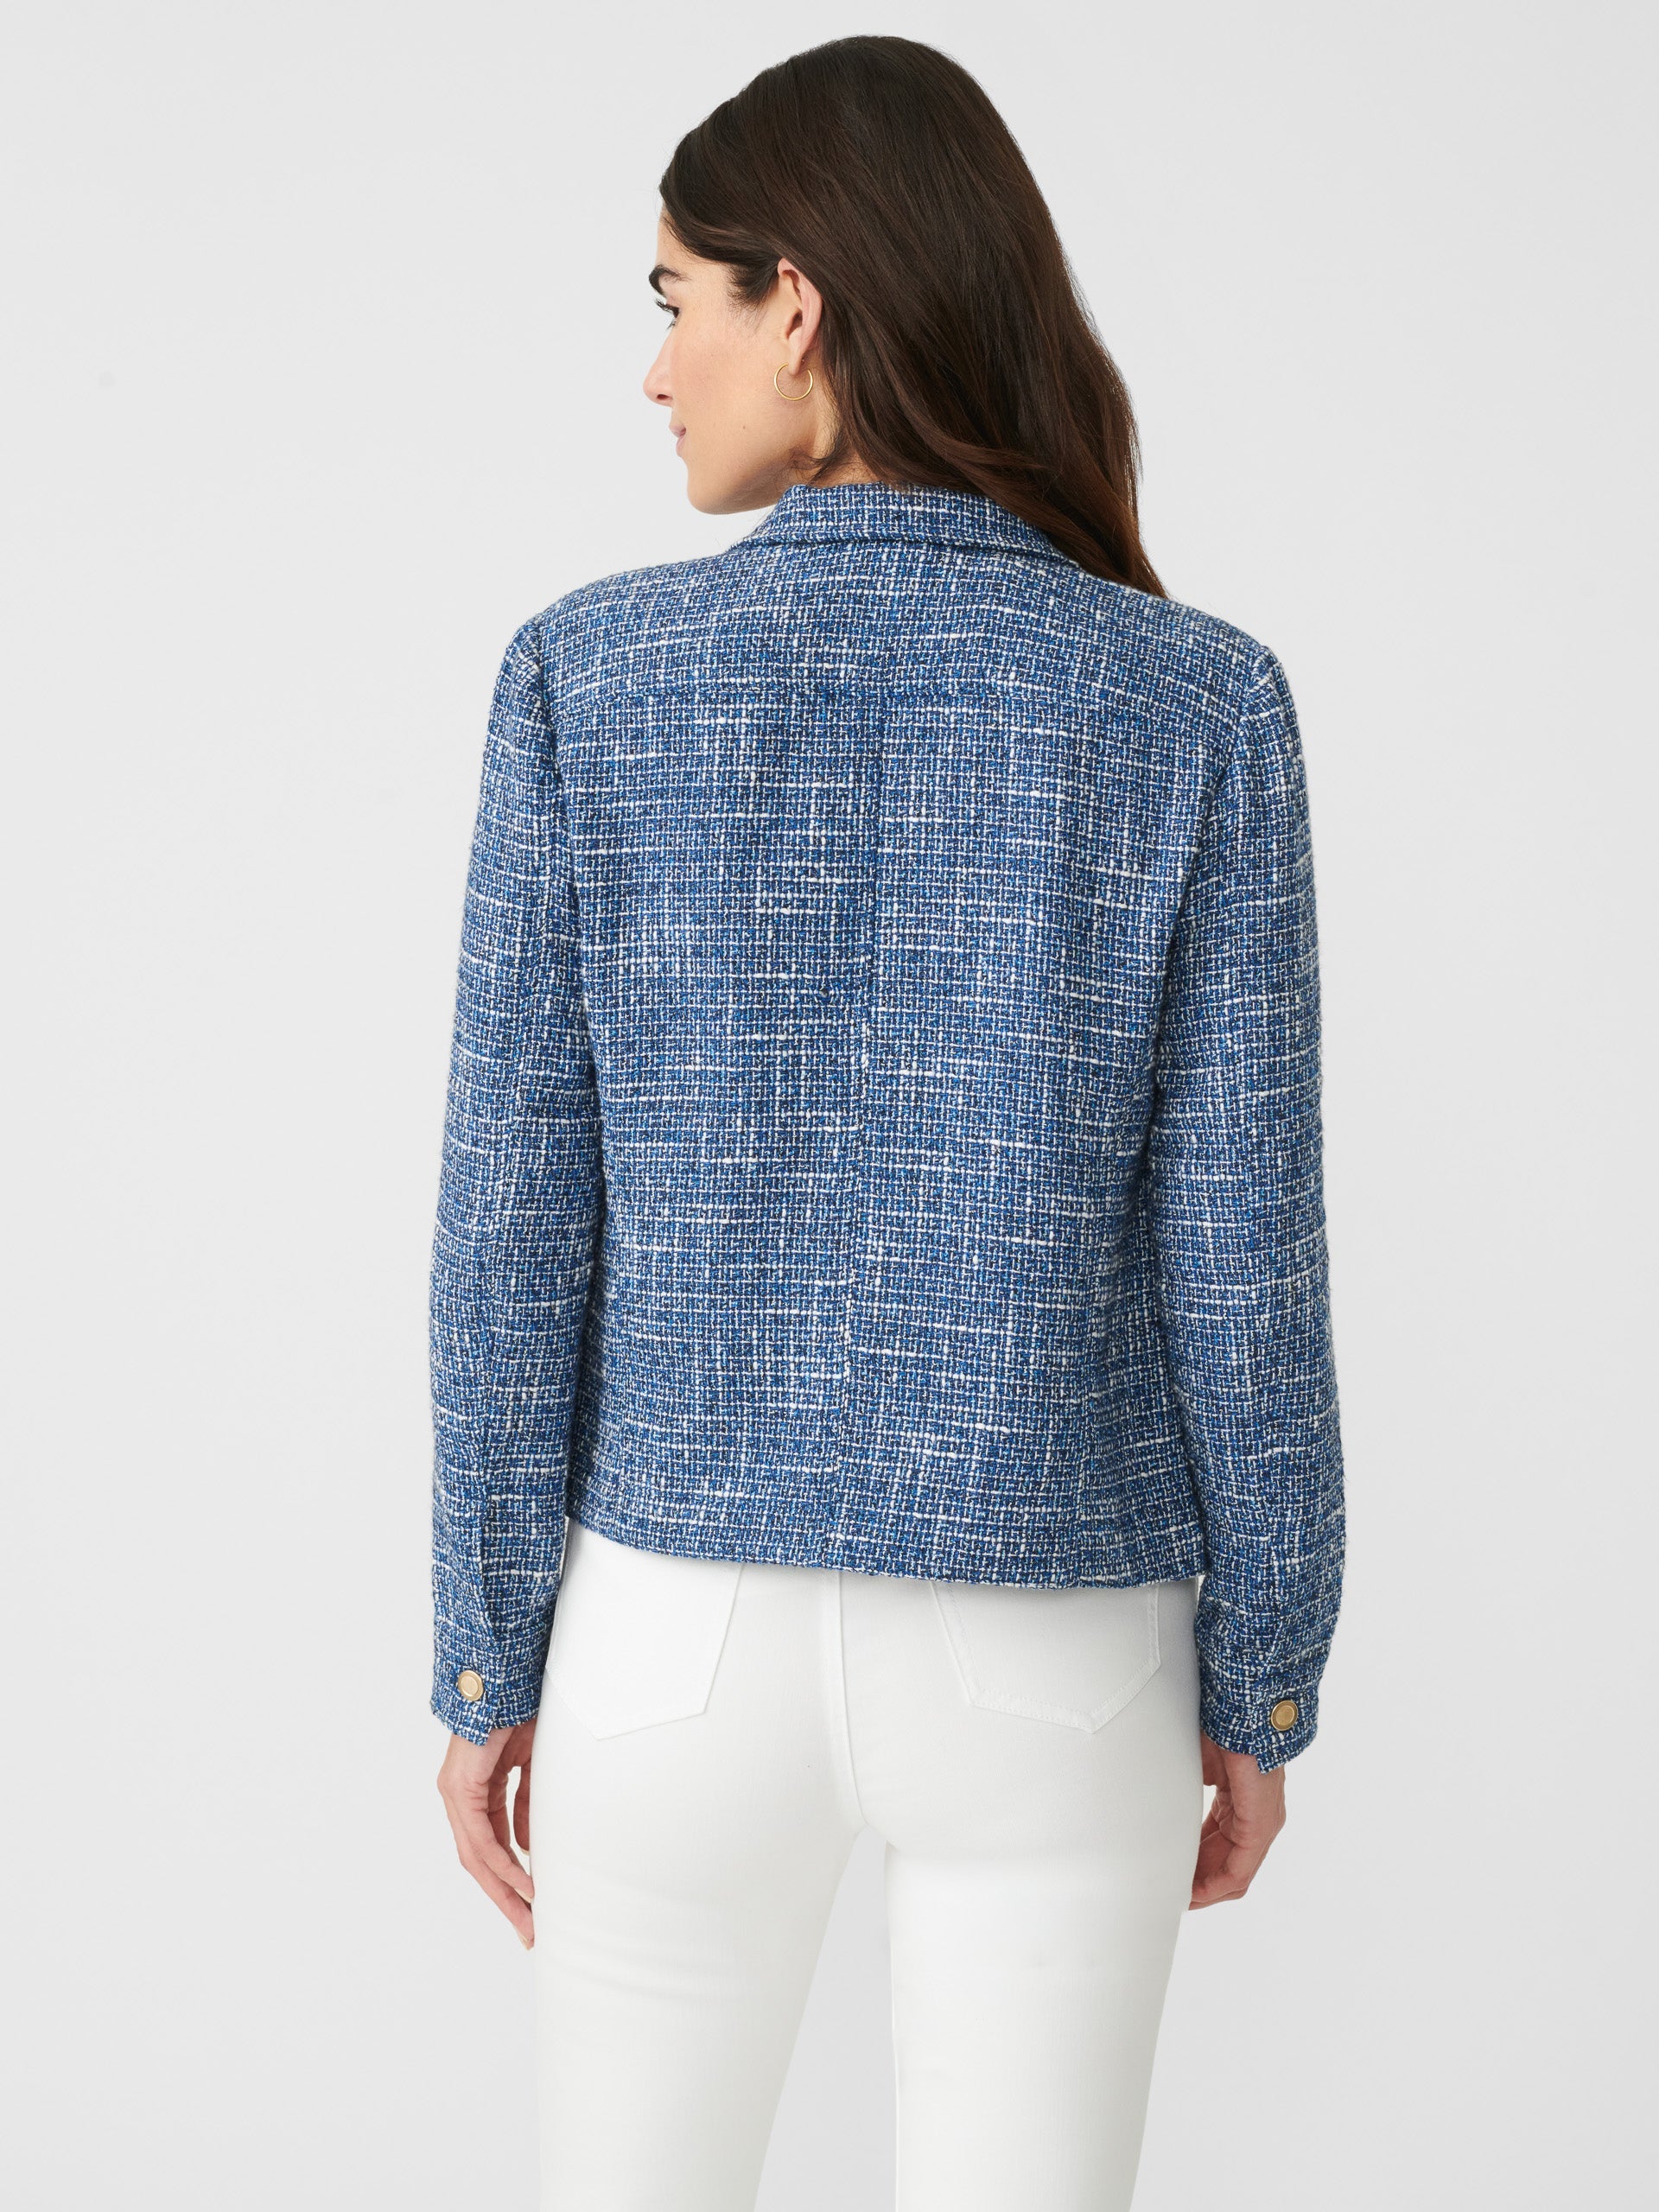 Model wears J.McLaughlin Colby Tweed Jacket in blue made with cotton/polyester/linen.